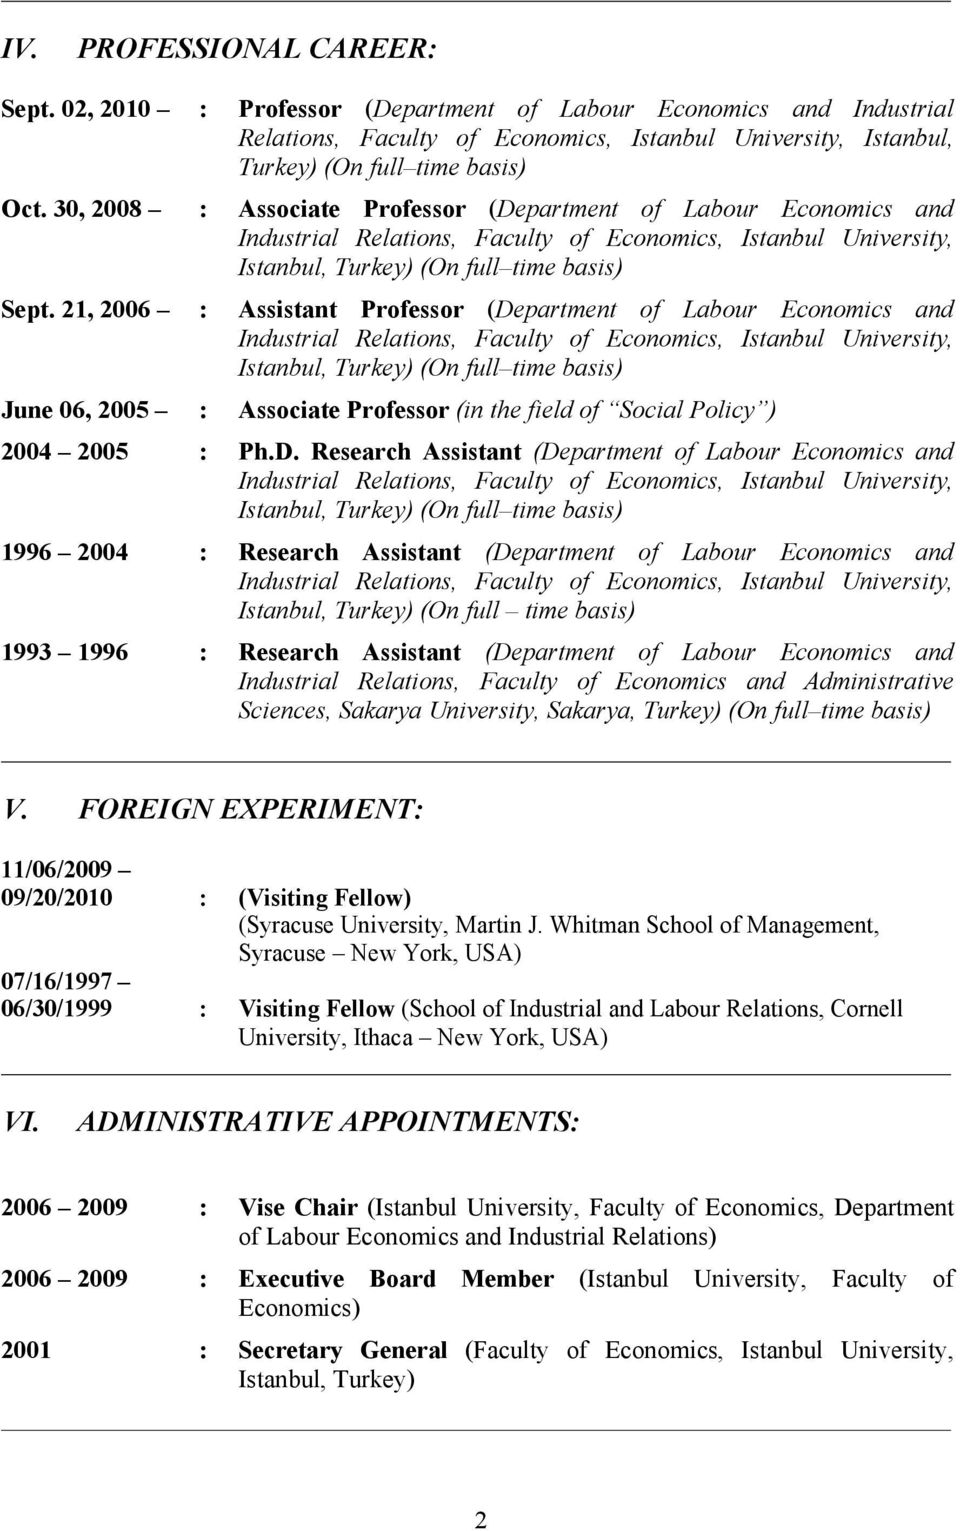 21, 2006 : Assistant Professor (Department of Labour Economics and Industrial Relations, Faculty of Economics, Istanbul University, Istanbul, Turkey) (On full time basis) June 06, 2005 : Associate